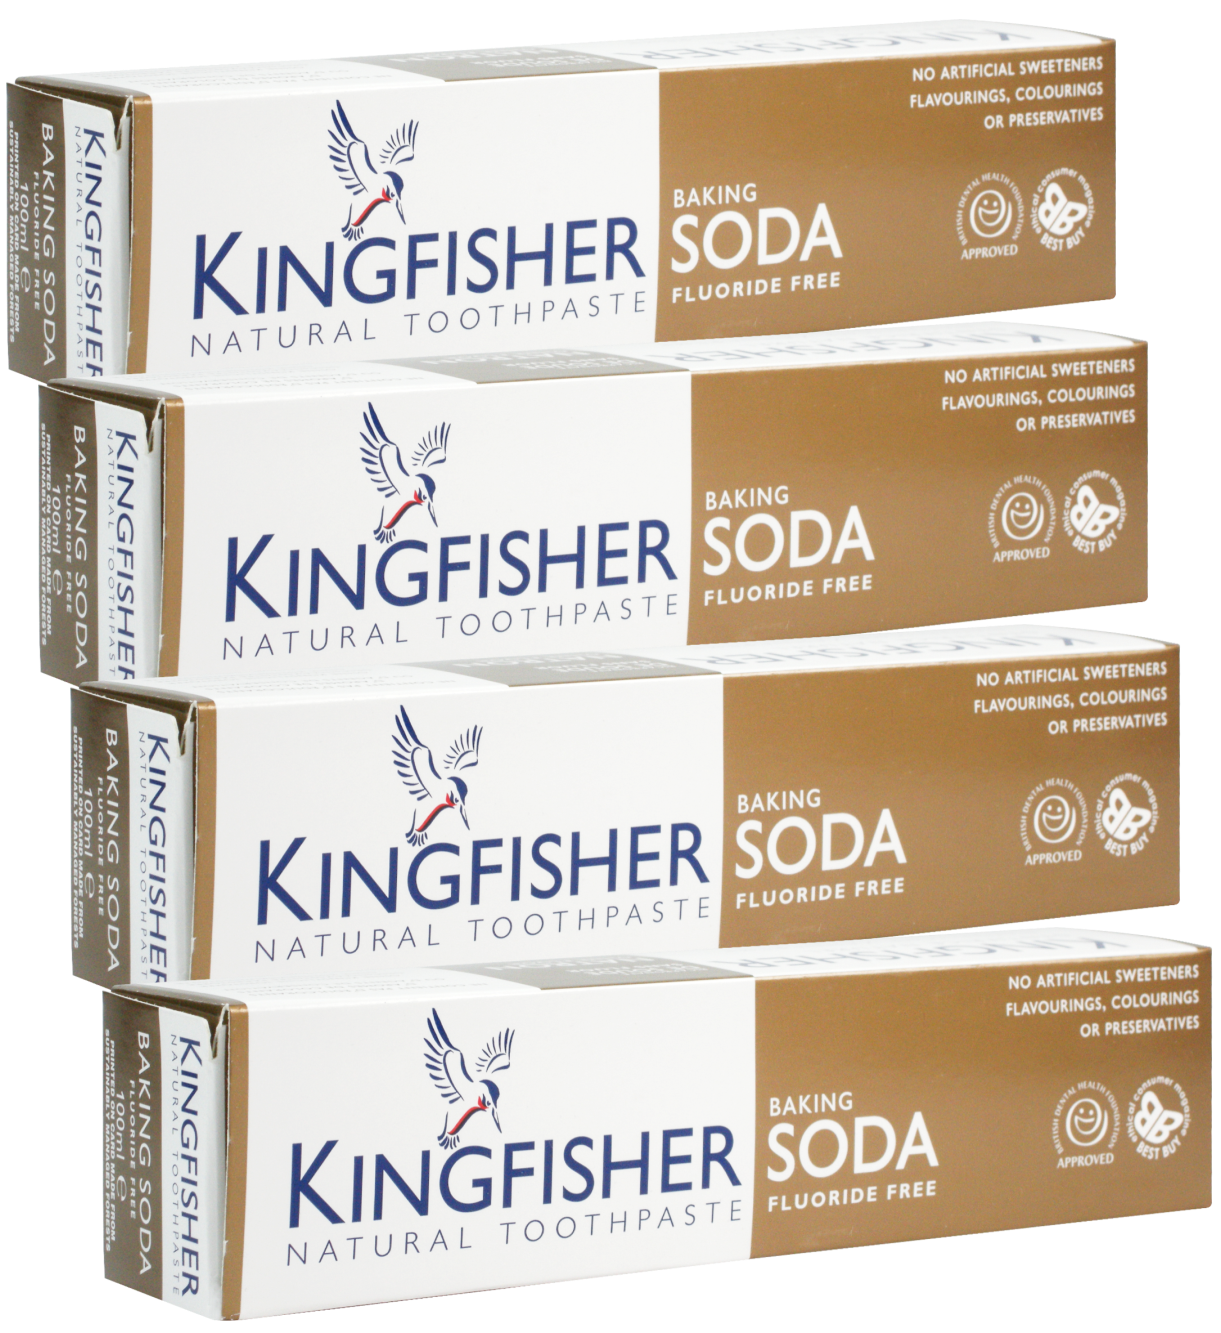 Kingfisher Toothpaste - Baking Soda Fluoride Free Toothpaste (100ml) - Pack of 4